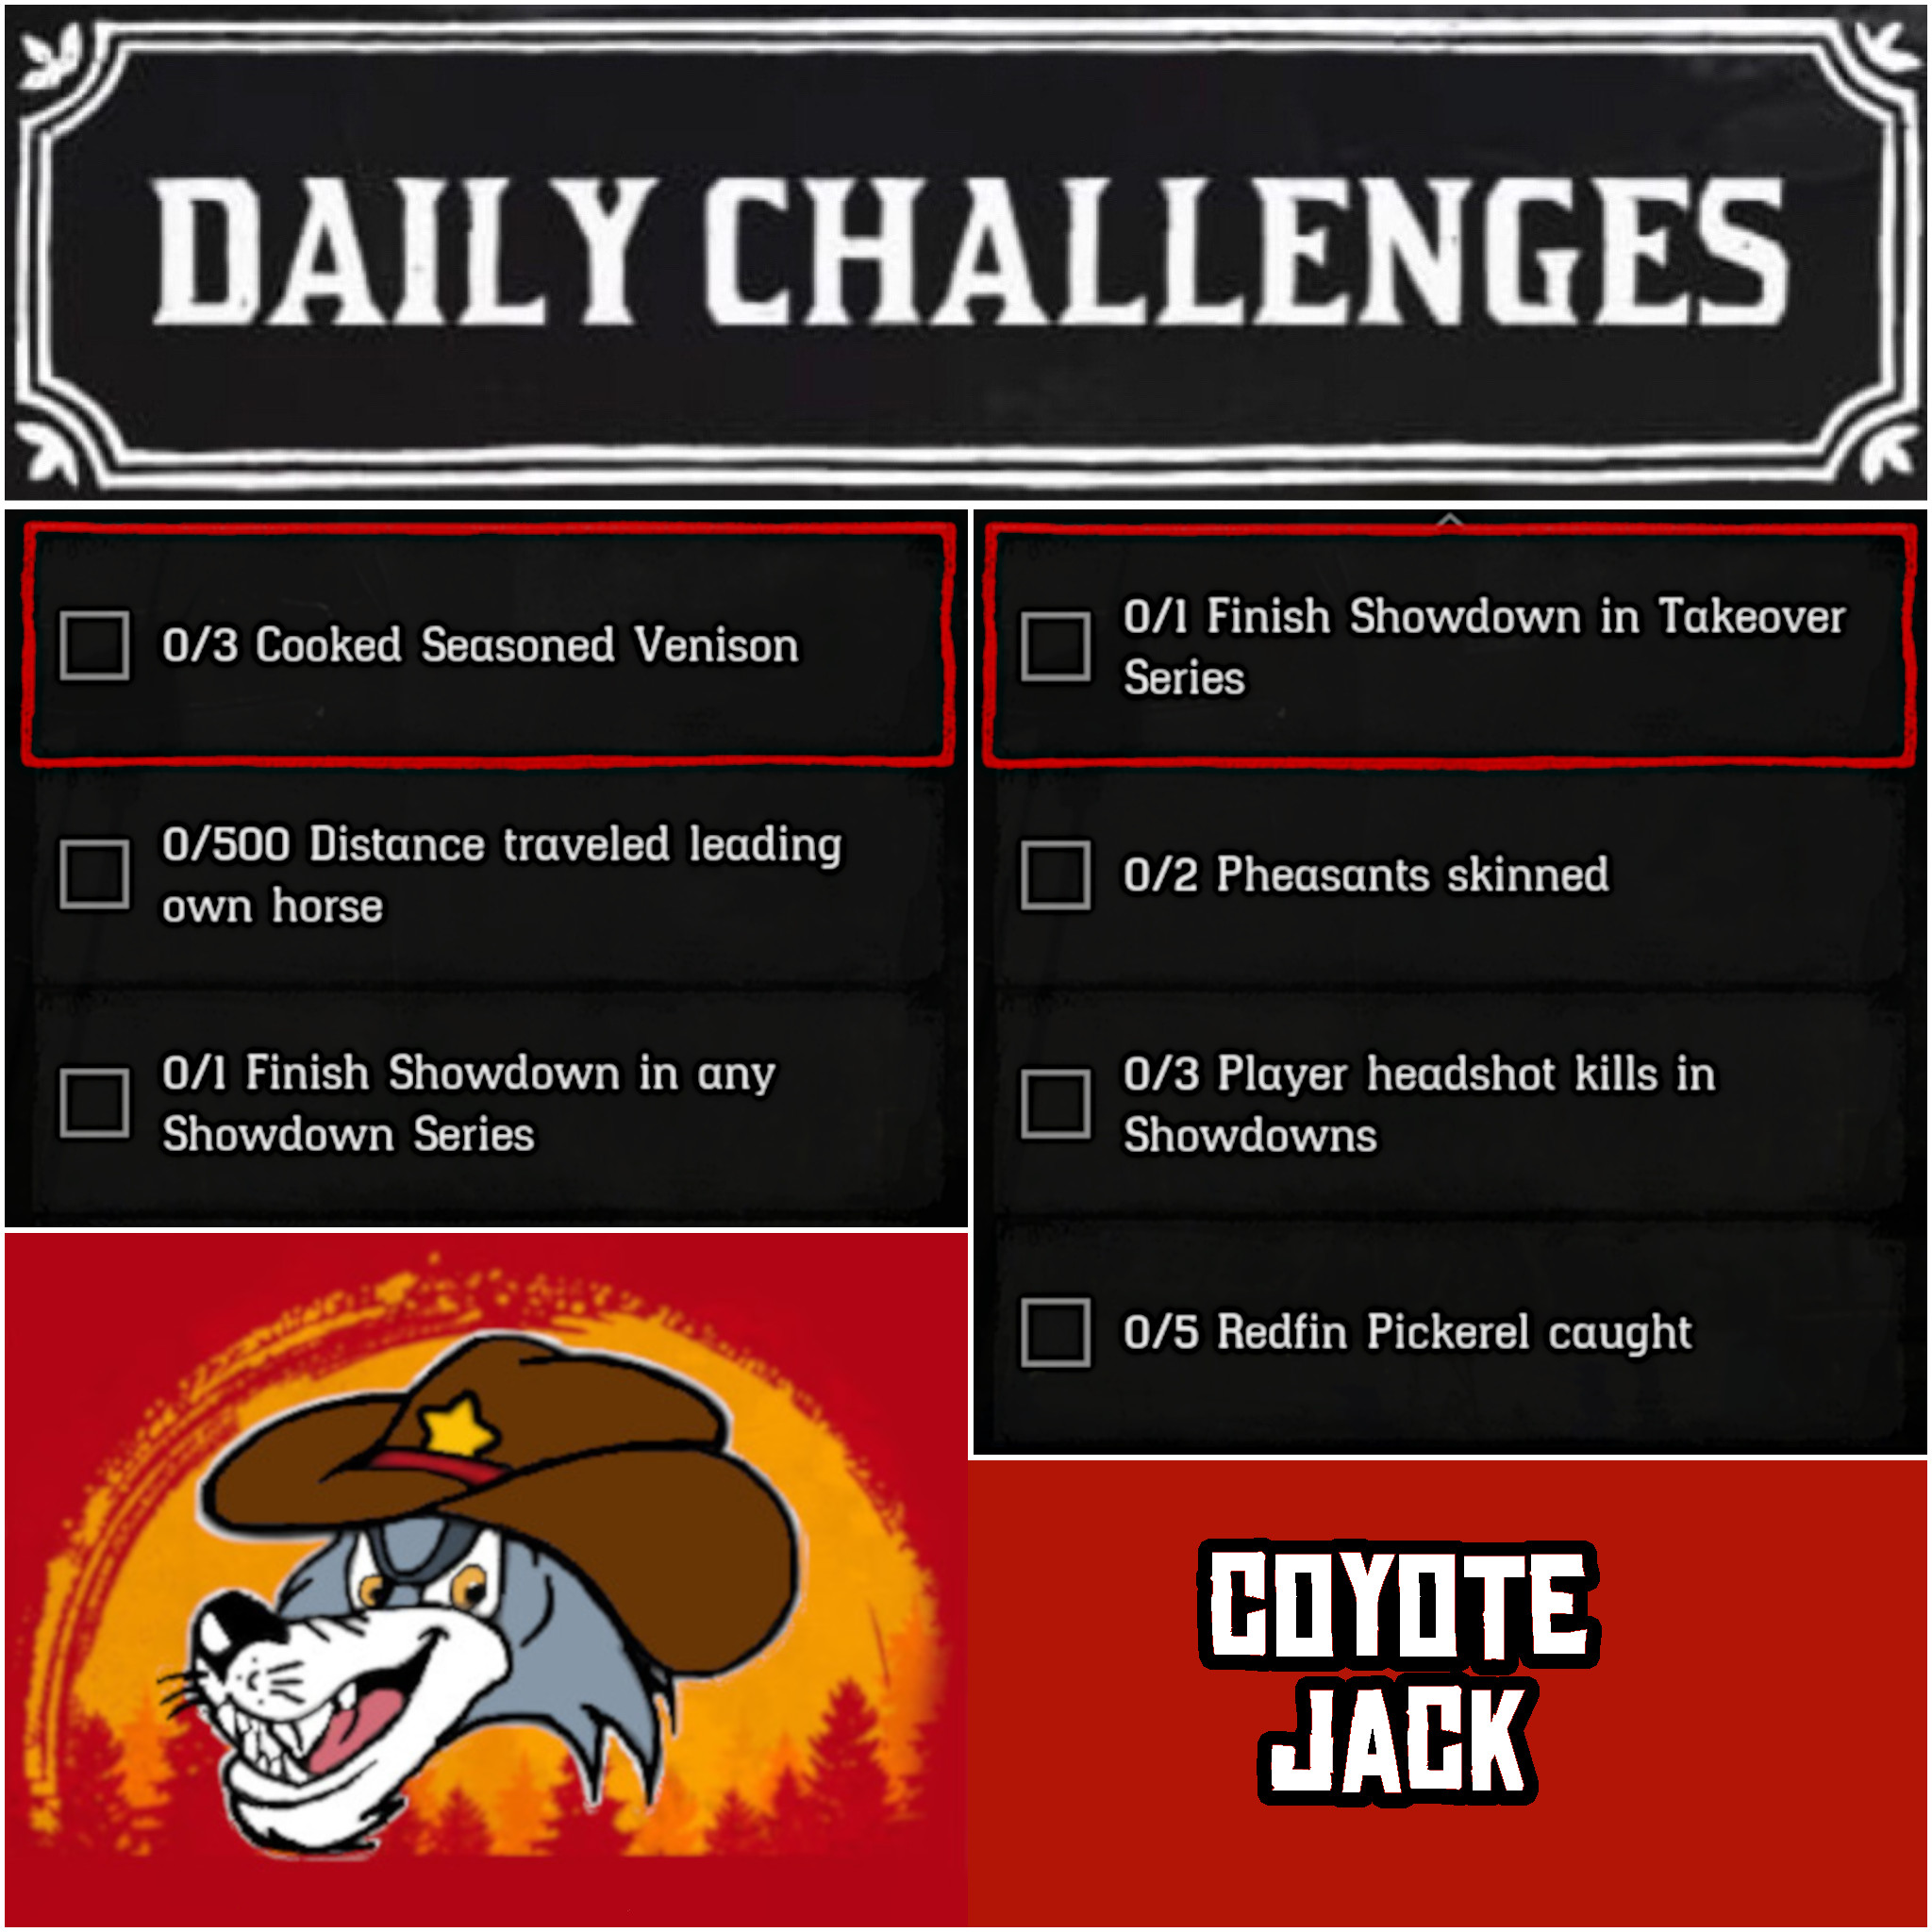 You are currently viewing Wednesday 07 April Daily Challenges